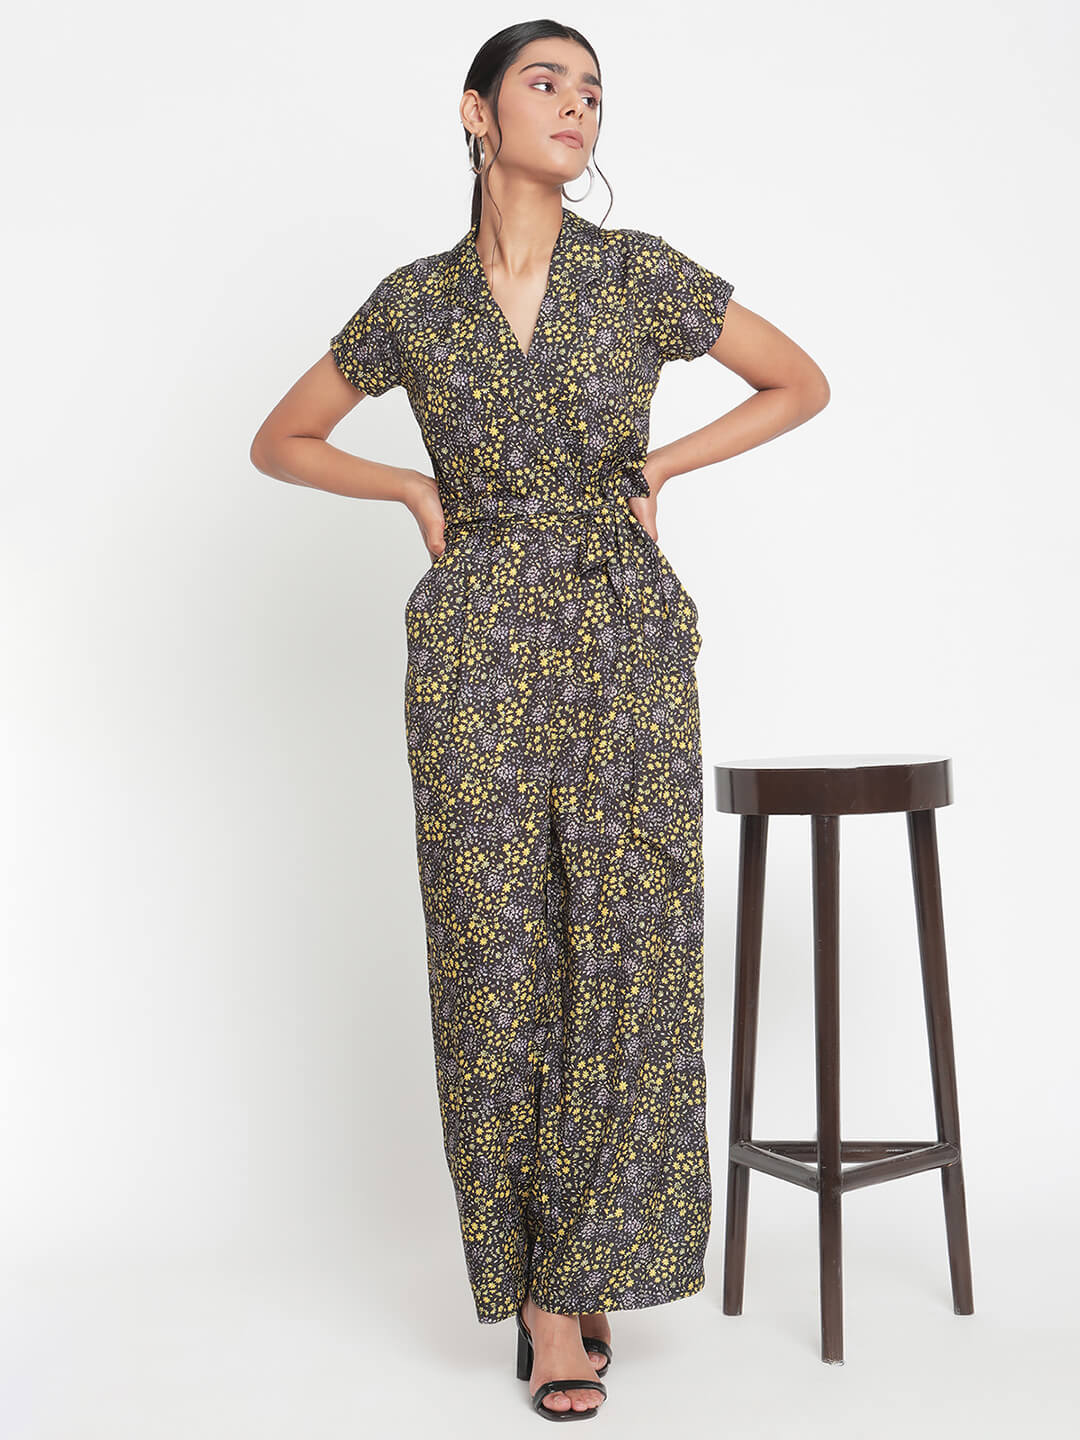 Msfq Women Printed Basic Jumpsuit With Layered Detail